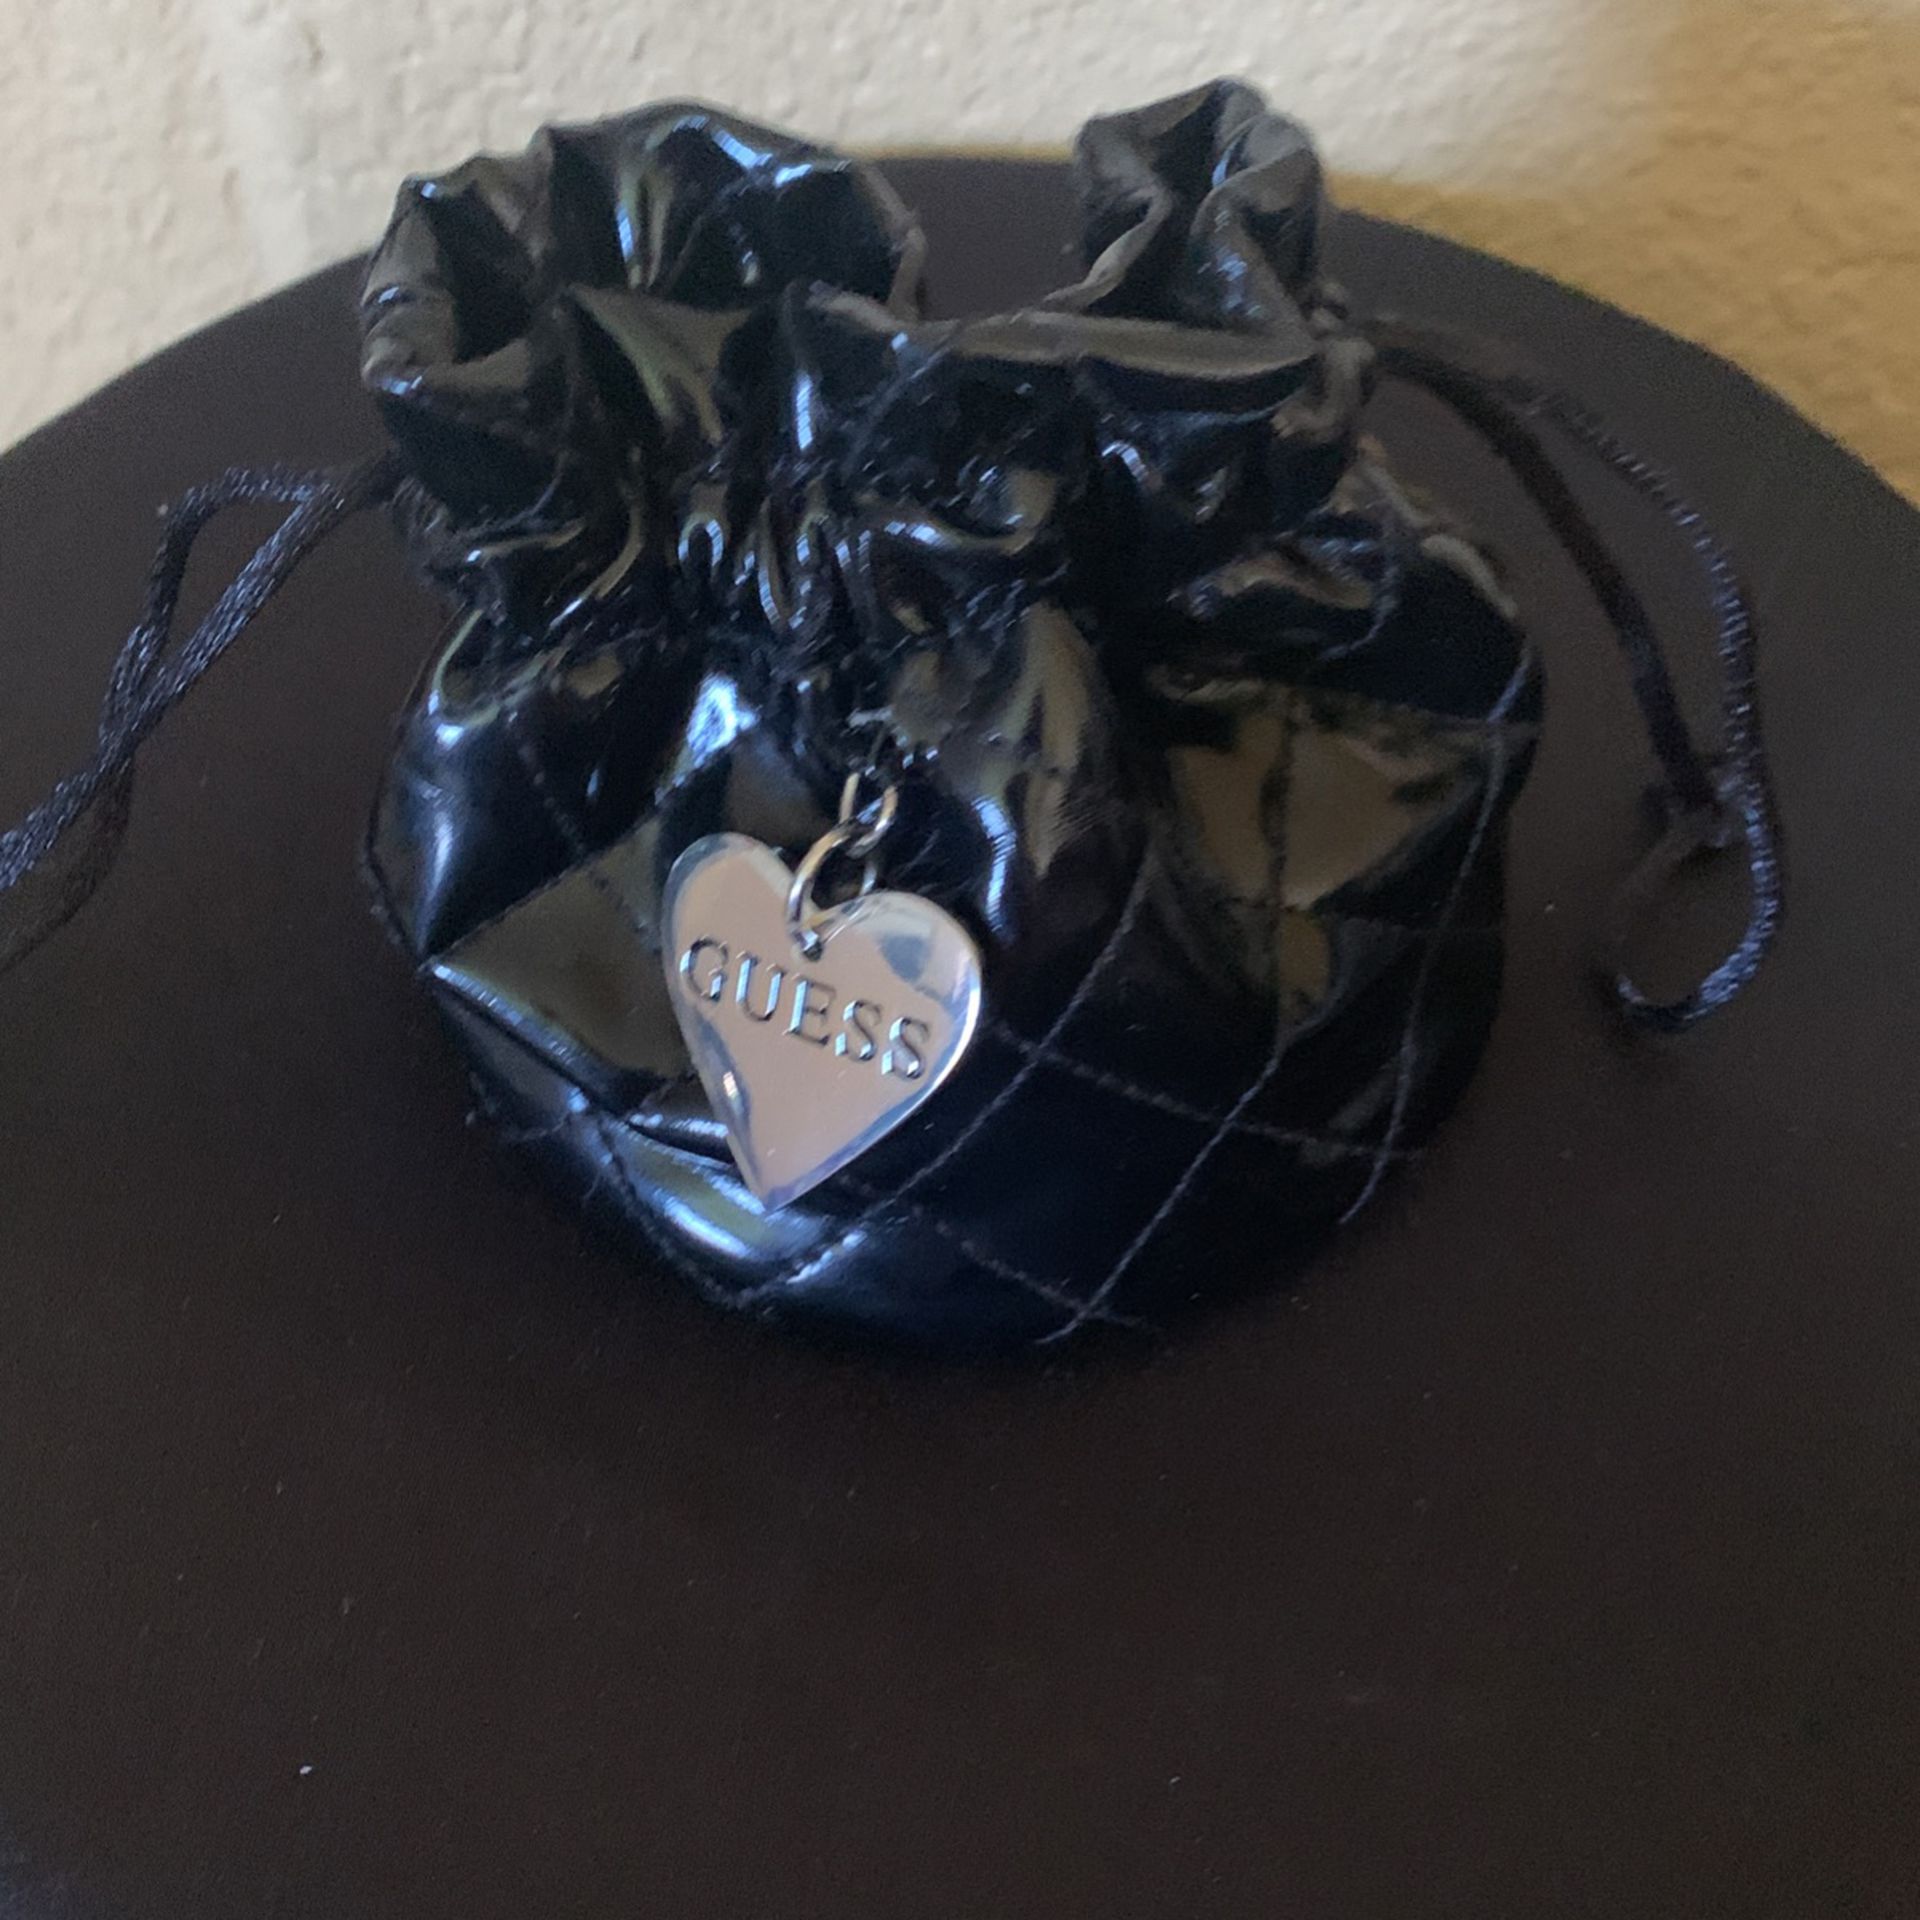 GUESS Jewelry Gift Pouch Drawstring Black Quilted Bag with Guess Heart